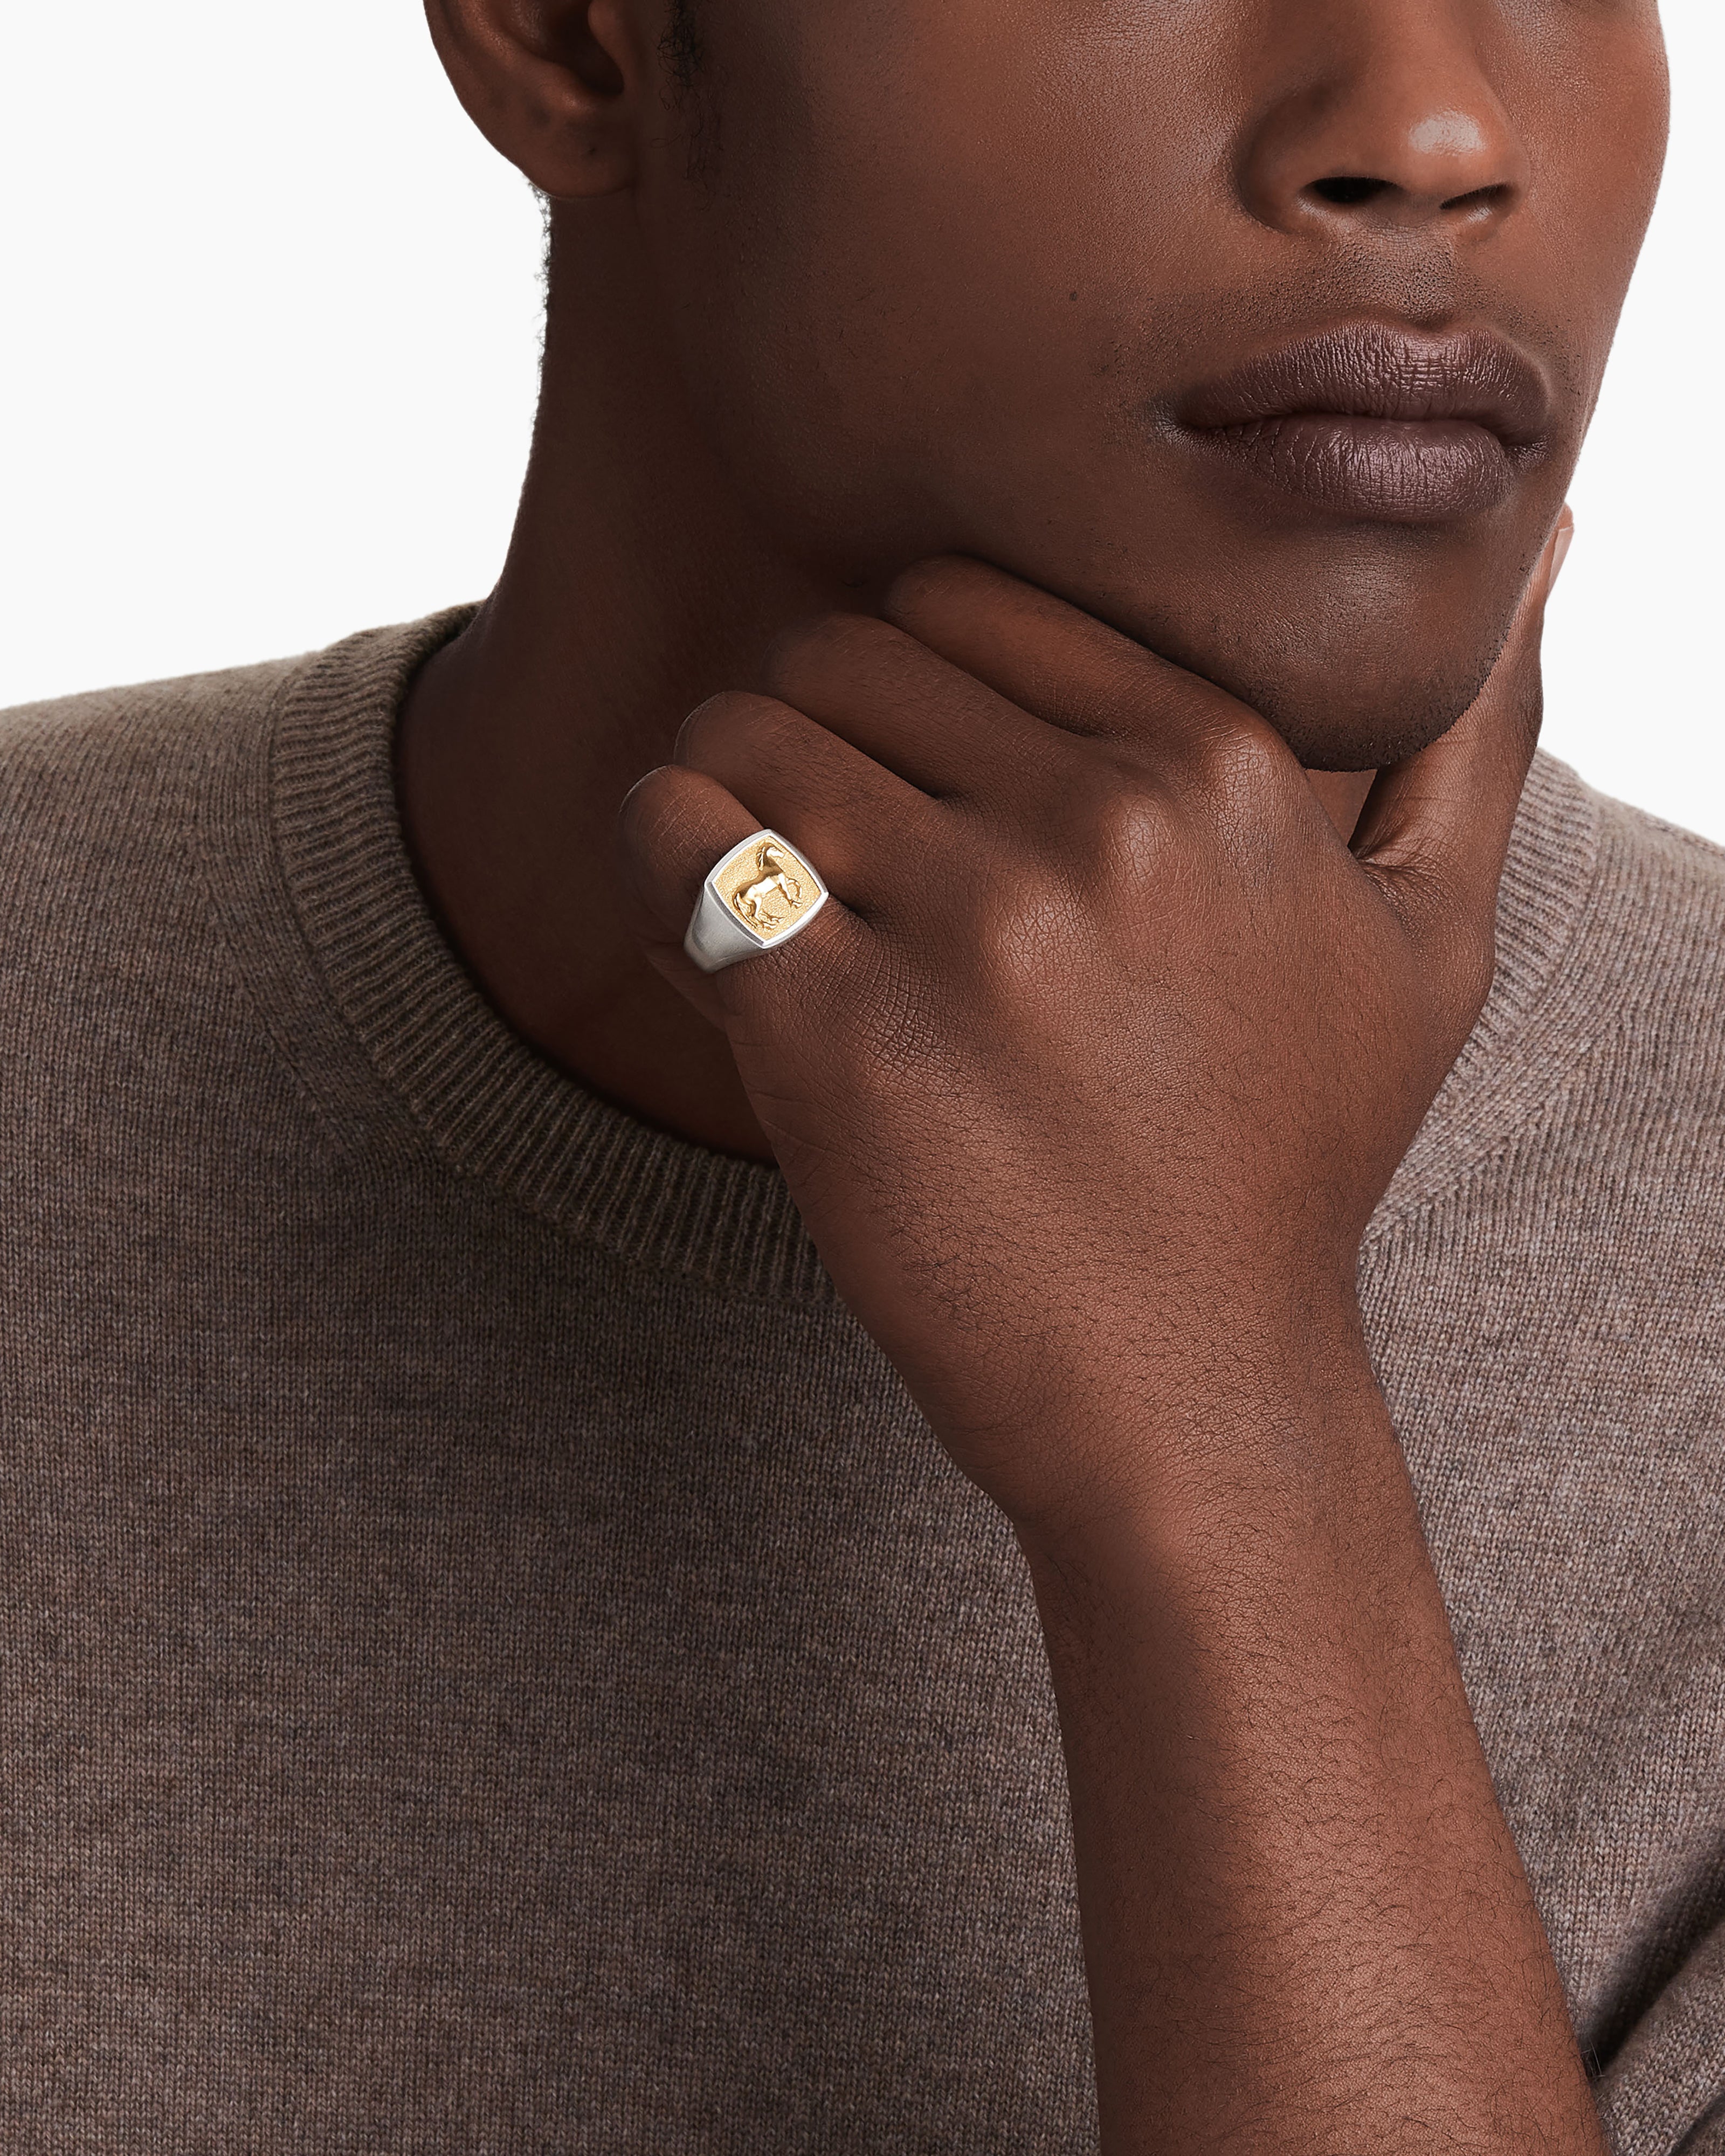 Oura Ring Gen 3 Review: Samsung's Galaxy Ring Has Stiff Competition